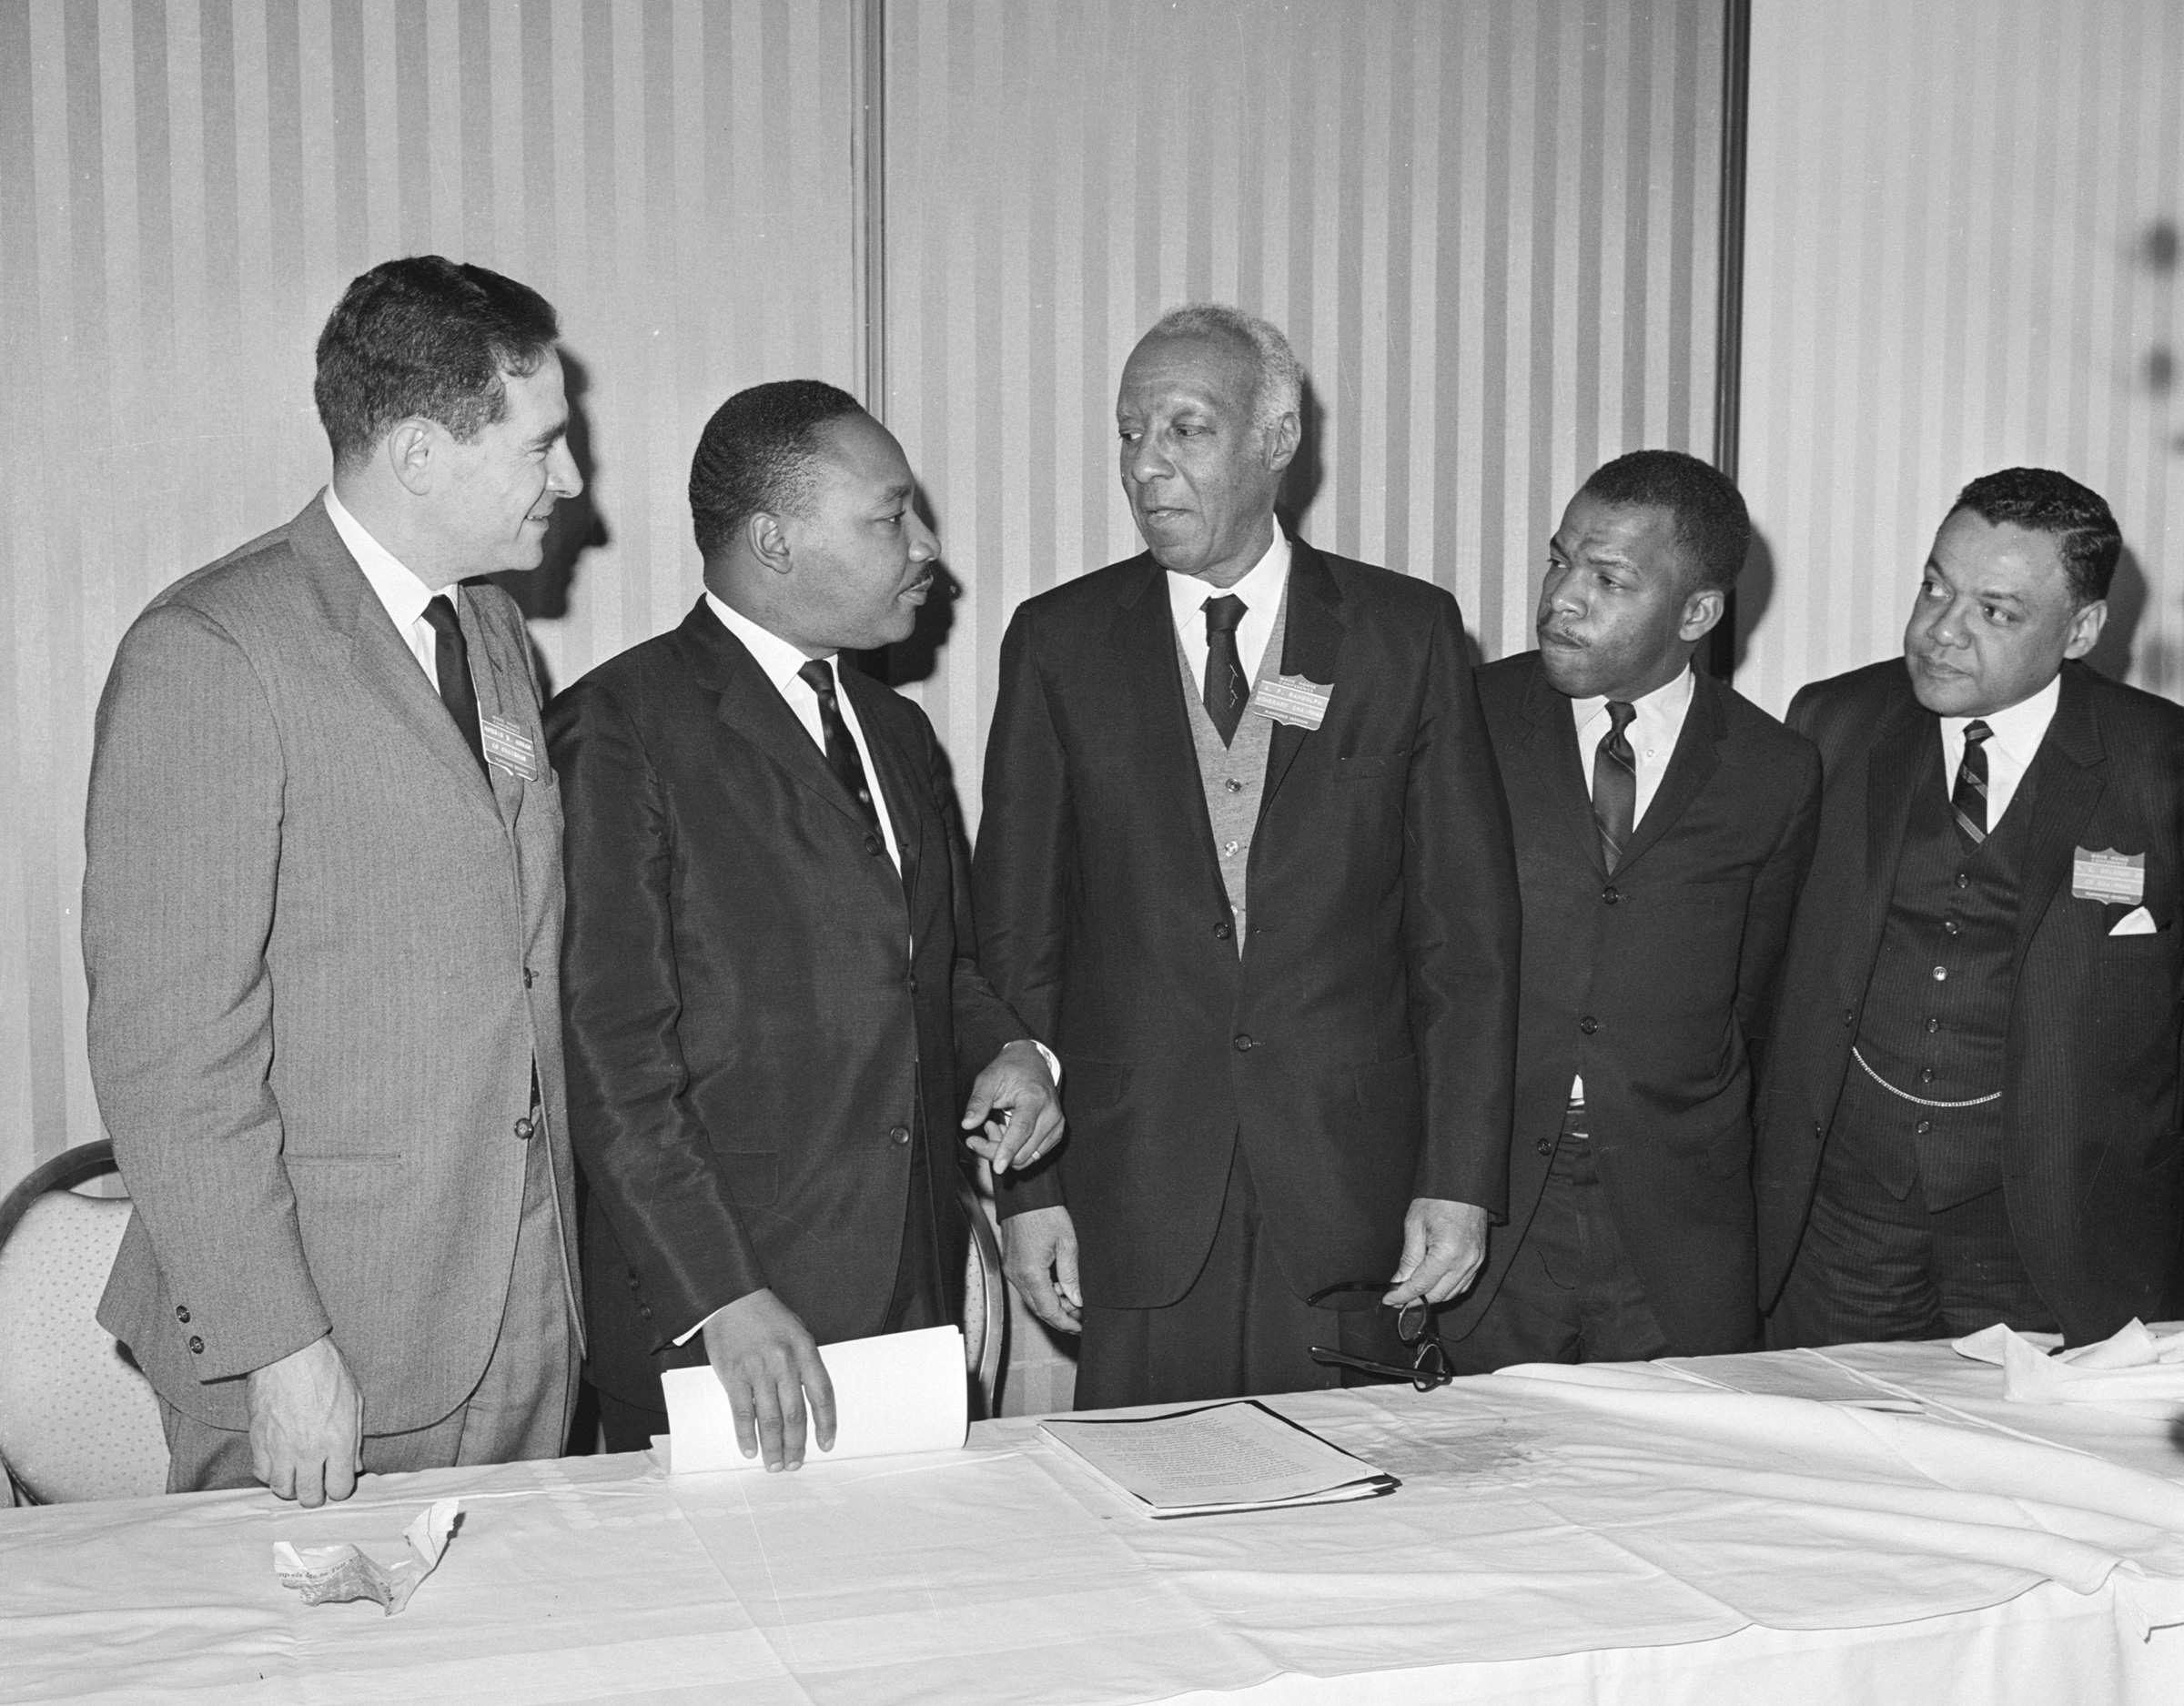 From left, Morris B. Abram, Rev. Martin Luther King, Jr., A. Philip Randolph, John Lewis and William T. Coleman take part the White House Conference on Civil Rights with a call for $100 billion "Freedom Budget".